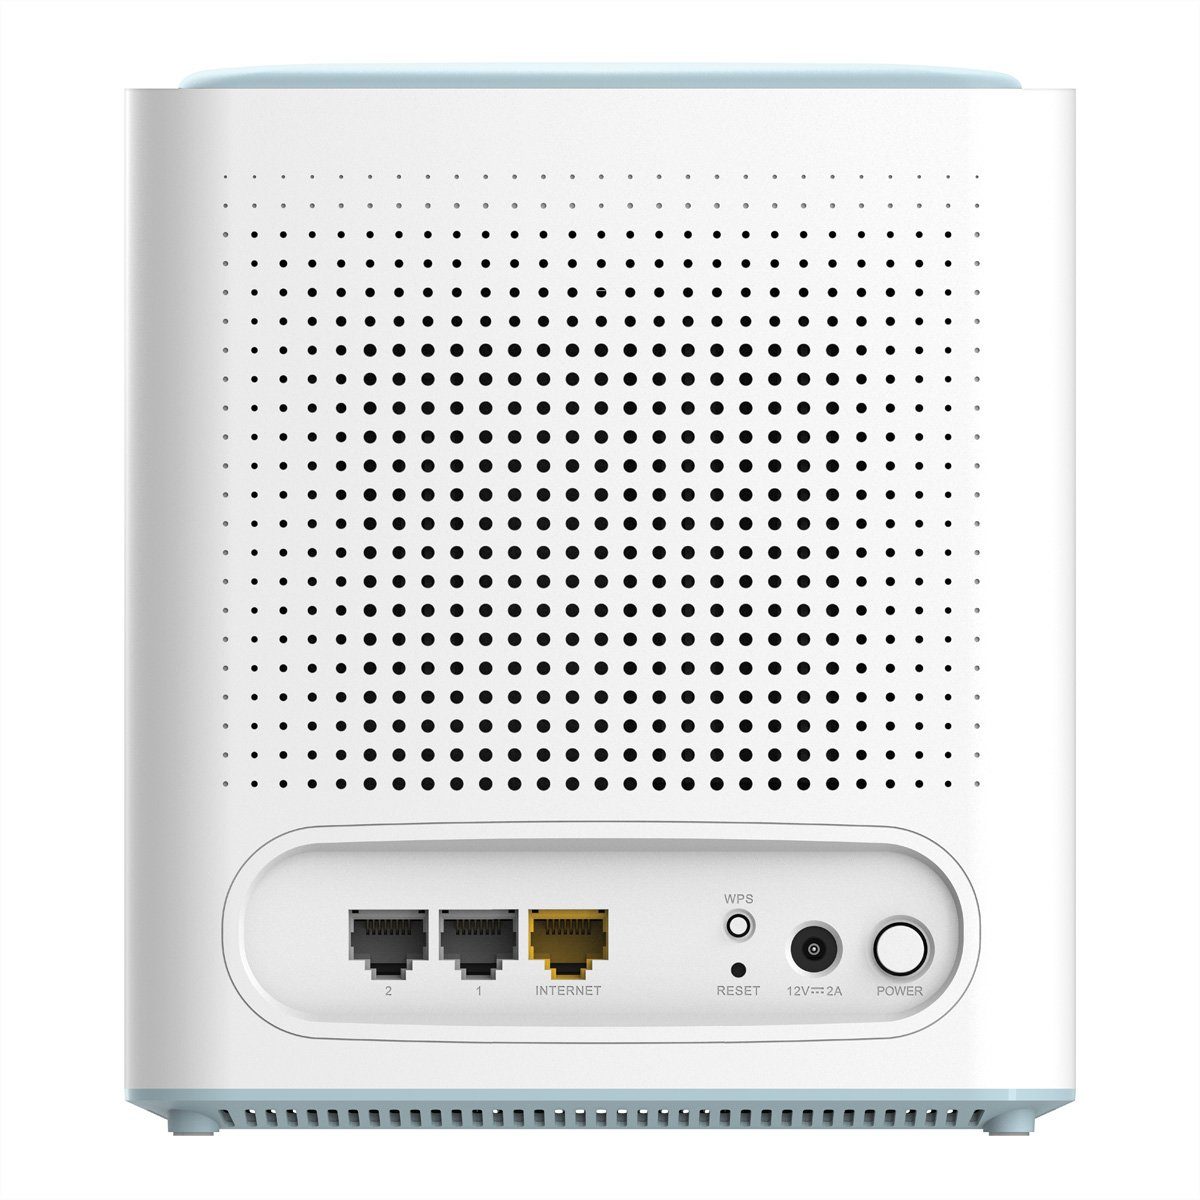 M32-3 Mesh 6, WiFi MU-MIMO AI, AX3200, D-Link WLAN-Repeater, 3-Pack System, EaglePro